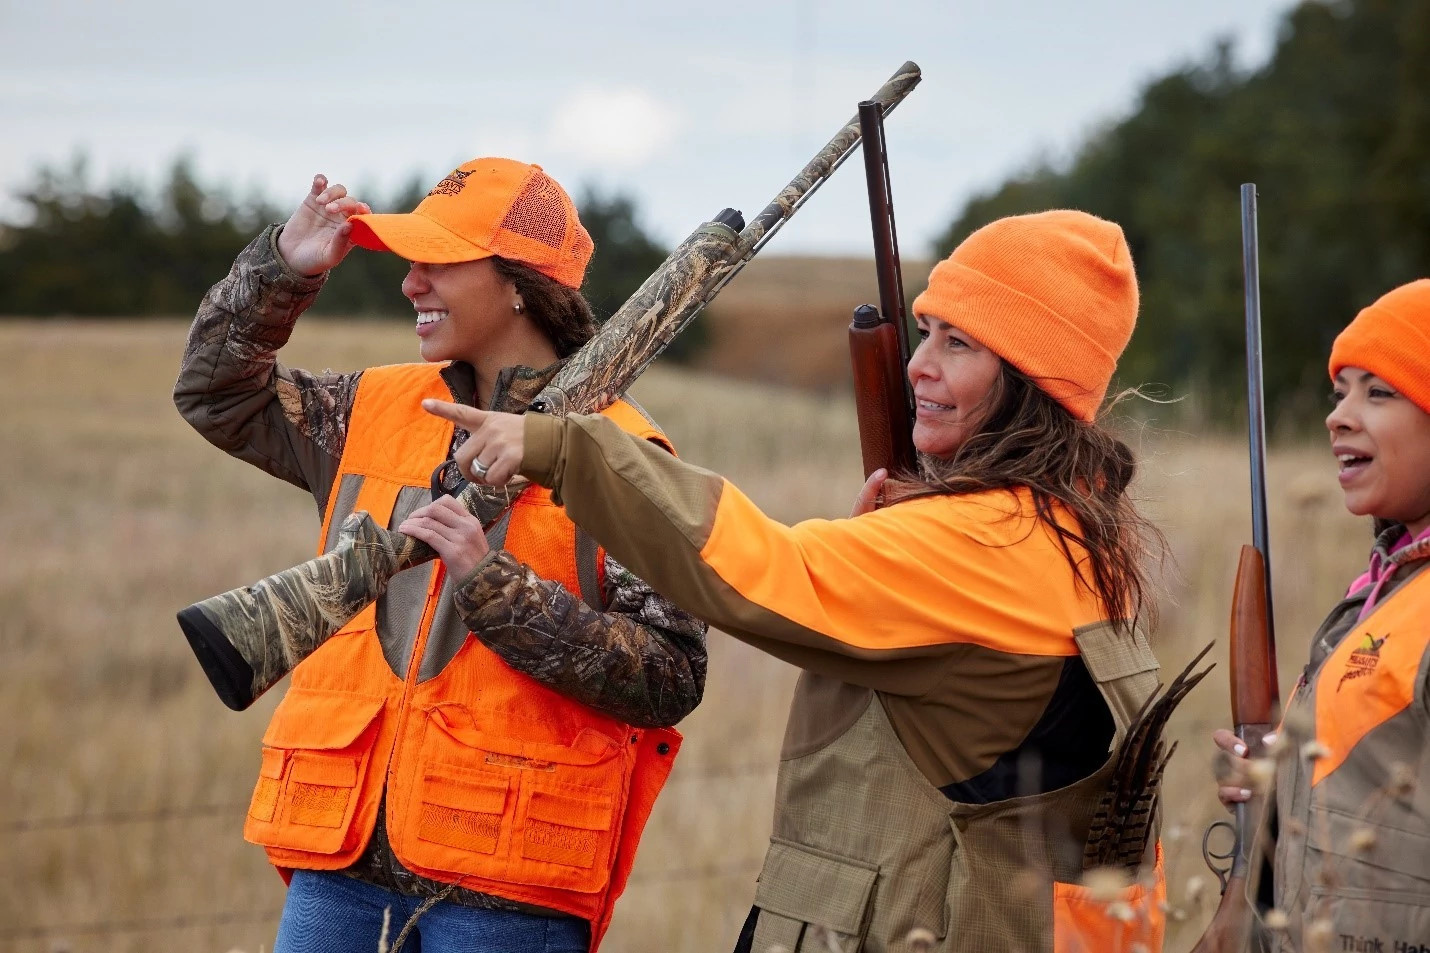 two young women hunters gather around a woman hunting mentor, all wearing blaze orange